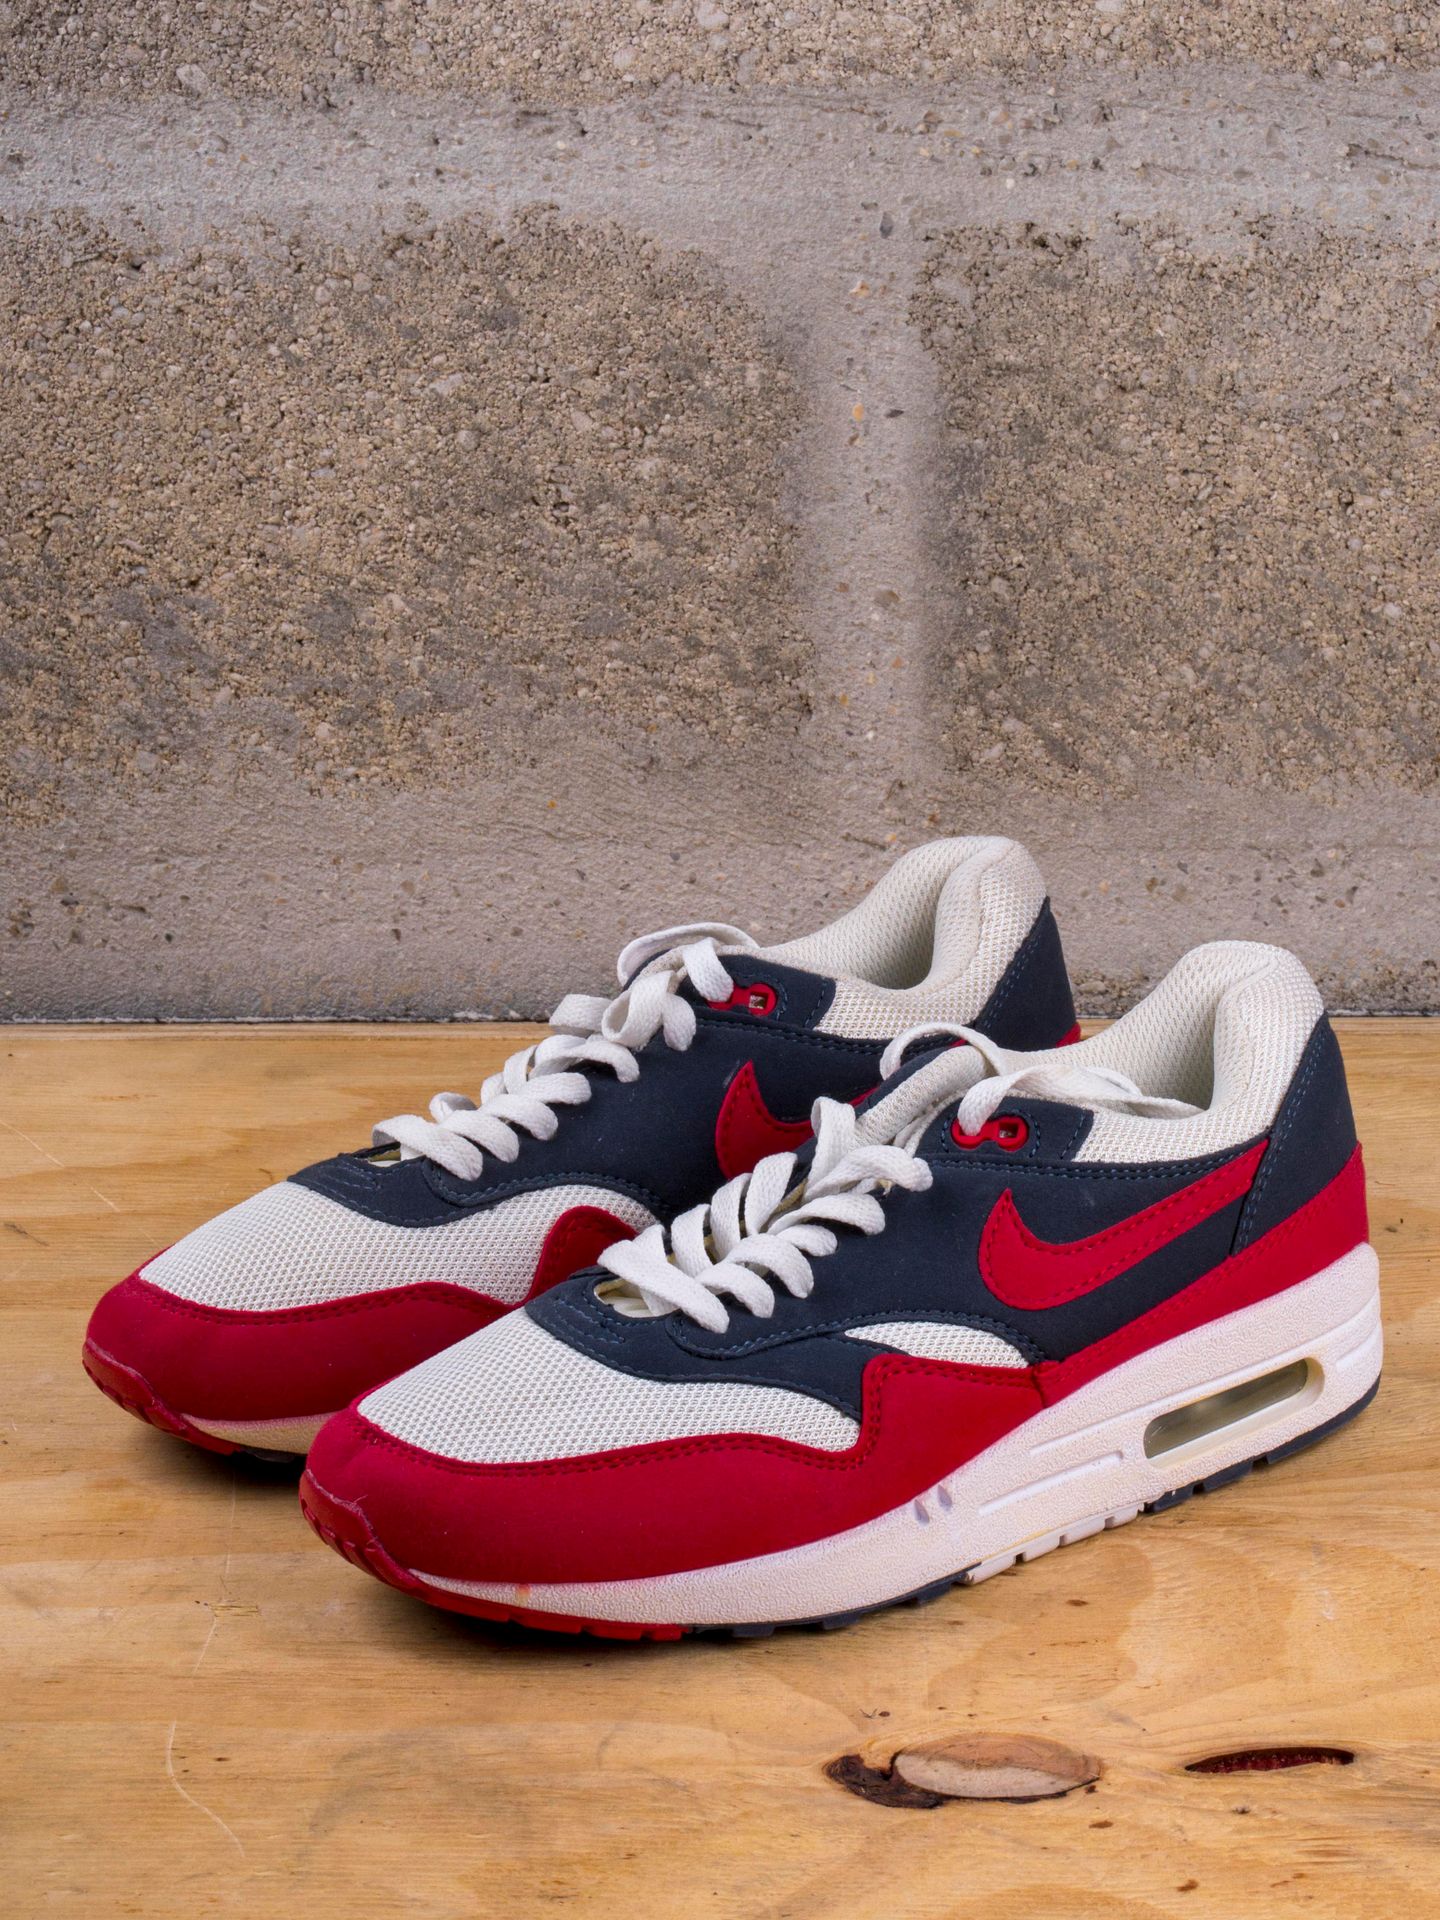 Null NIKE AIR MAX 1

Ripstop Pack

(308866-406)

US 8 / EU 41

(Guter Zustand)